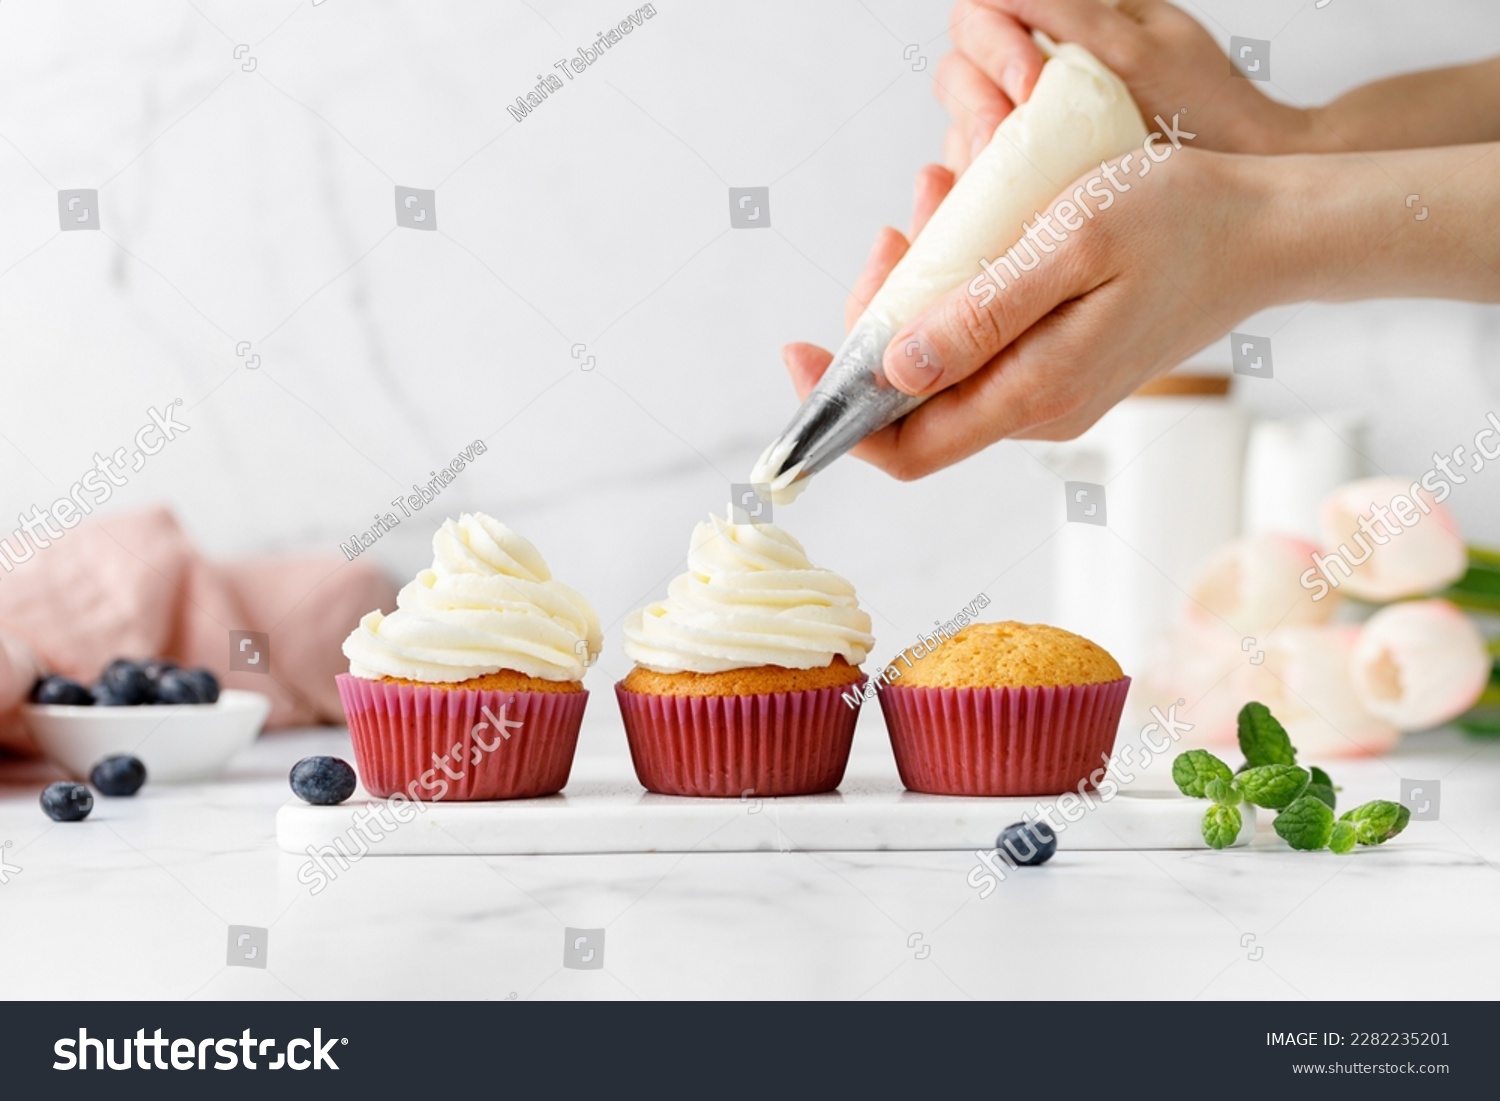 Making, decorating cupcakes, muffins with cream, blueberries and green mint leaves. Delicious homemade dessert. Pastry Process. Copy space. Pastry bag. #2282235201